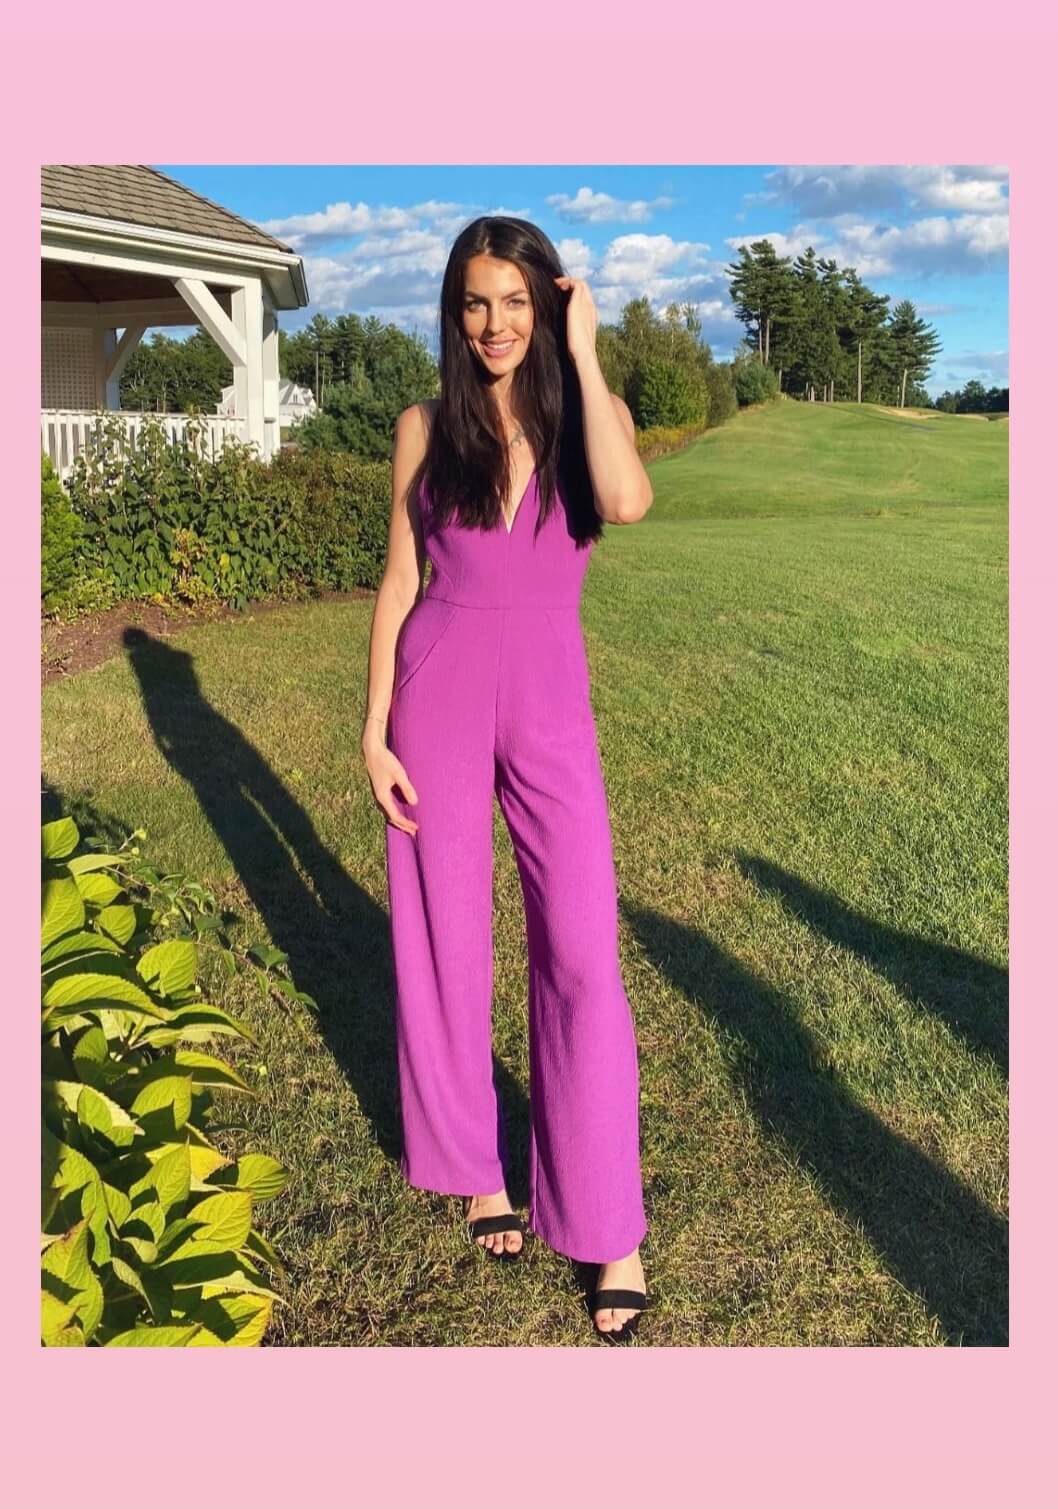 Image of Maddie standing outside in a purple jumpsuit